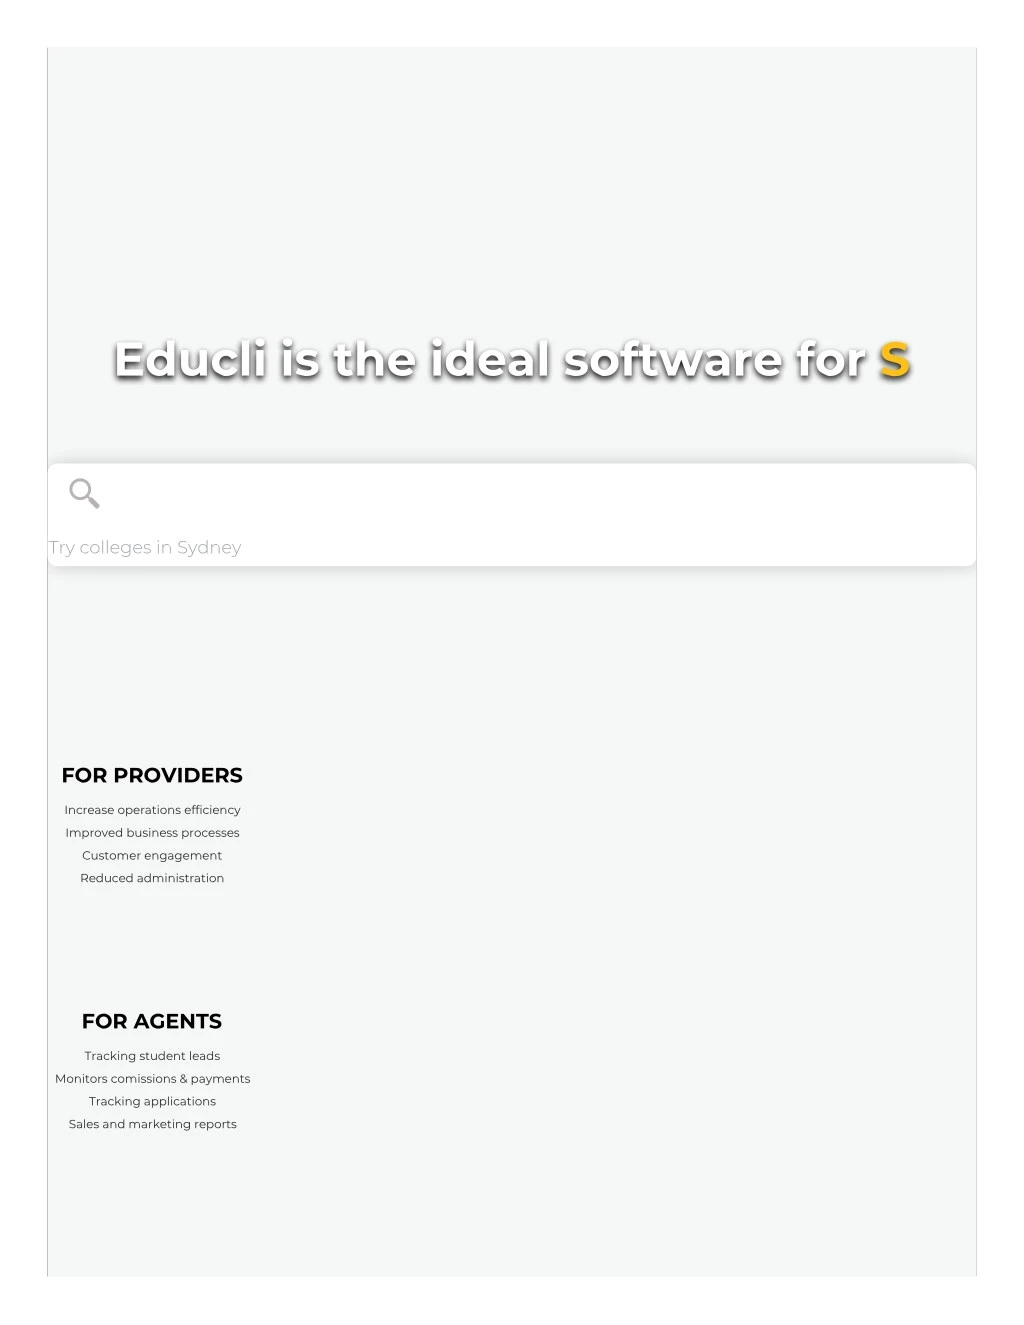 educli is the ideal software for s